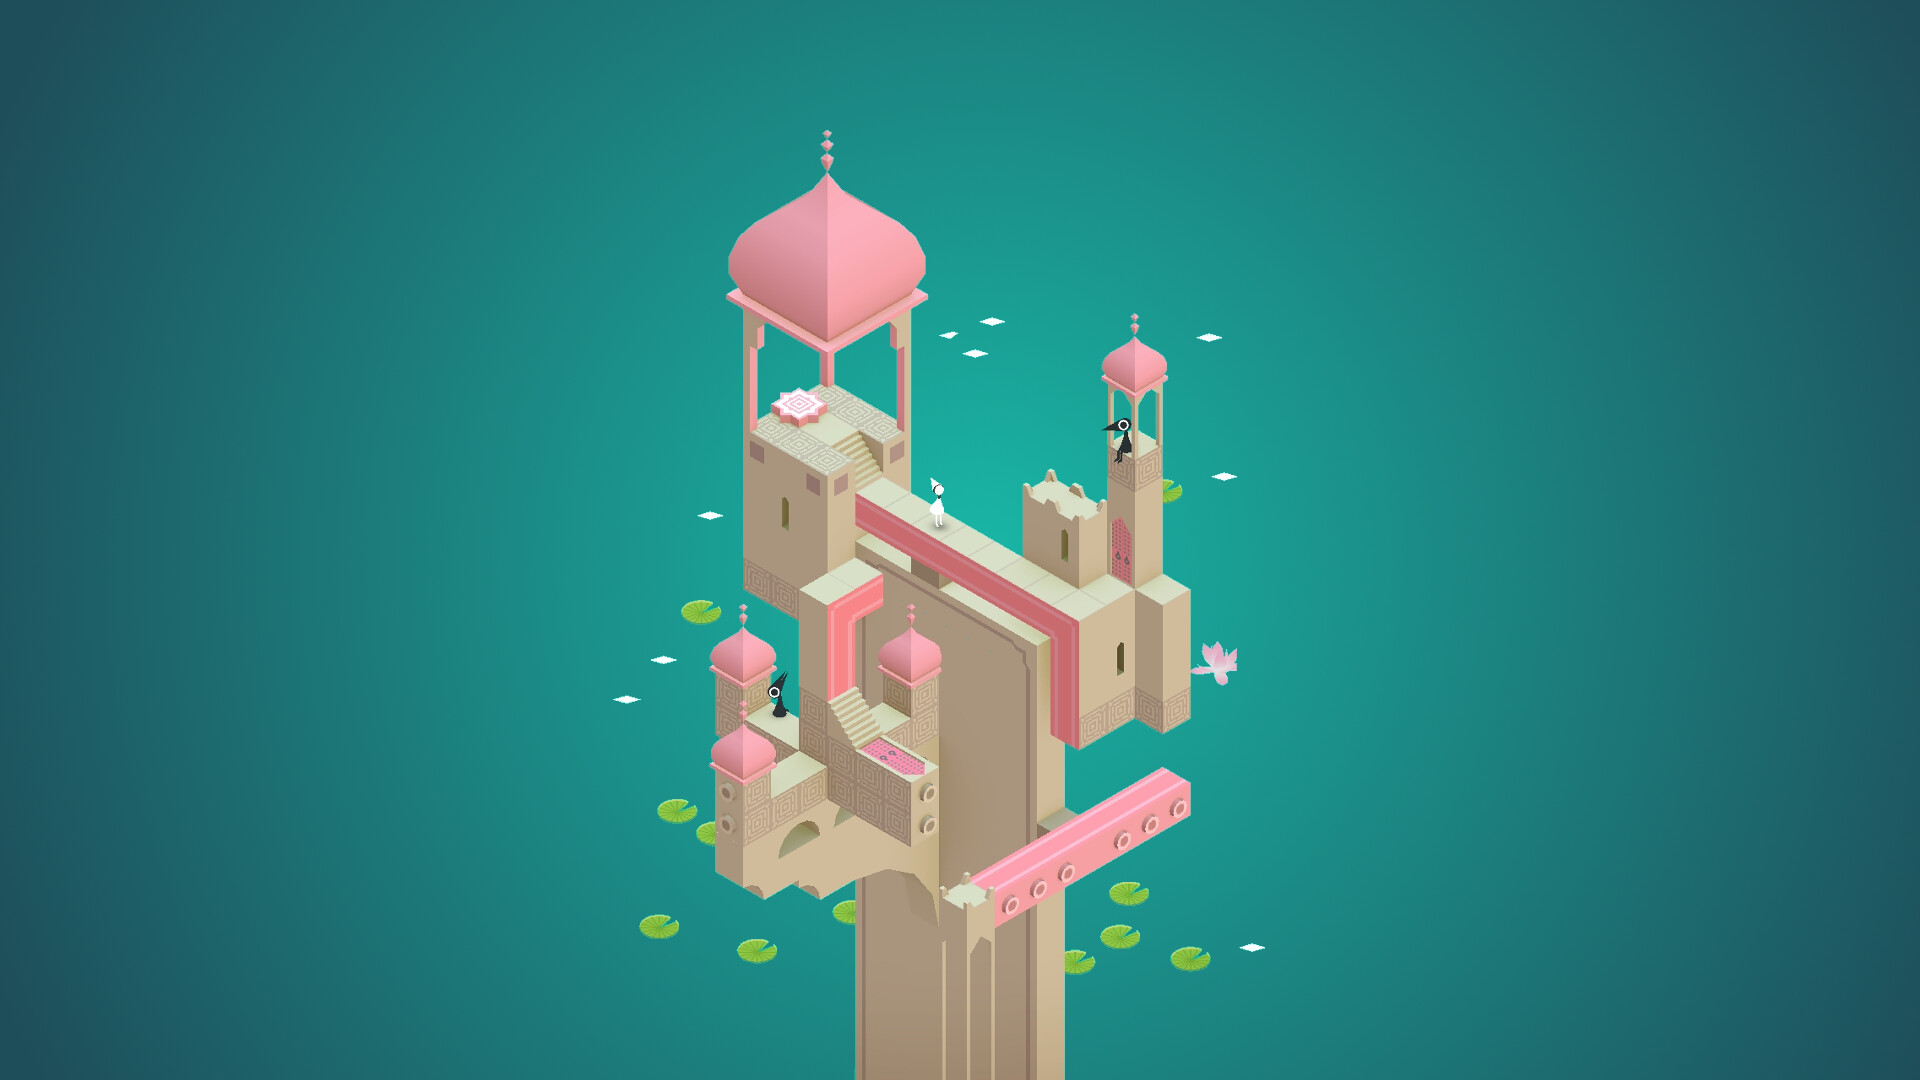 Monument Valley: The game's soundtrack features music by Stafford Bawler, Obfusc, and Grigori. 1920x1080 Full HD Wallpaper.